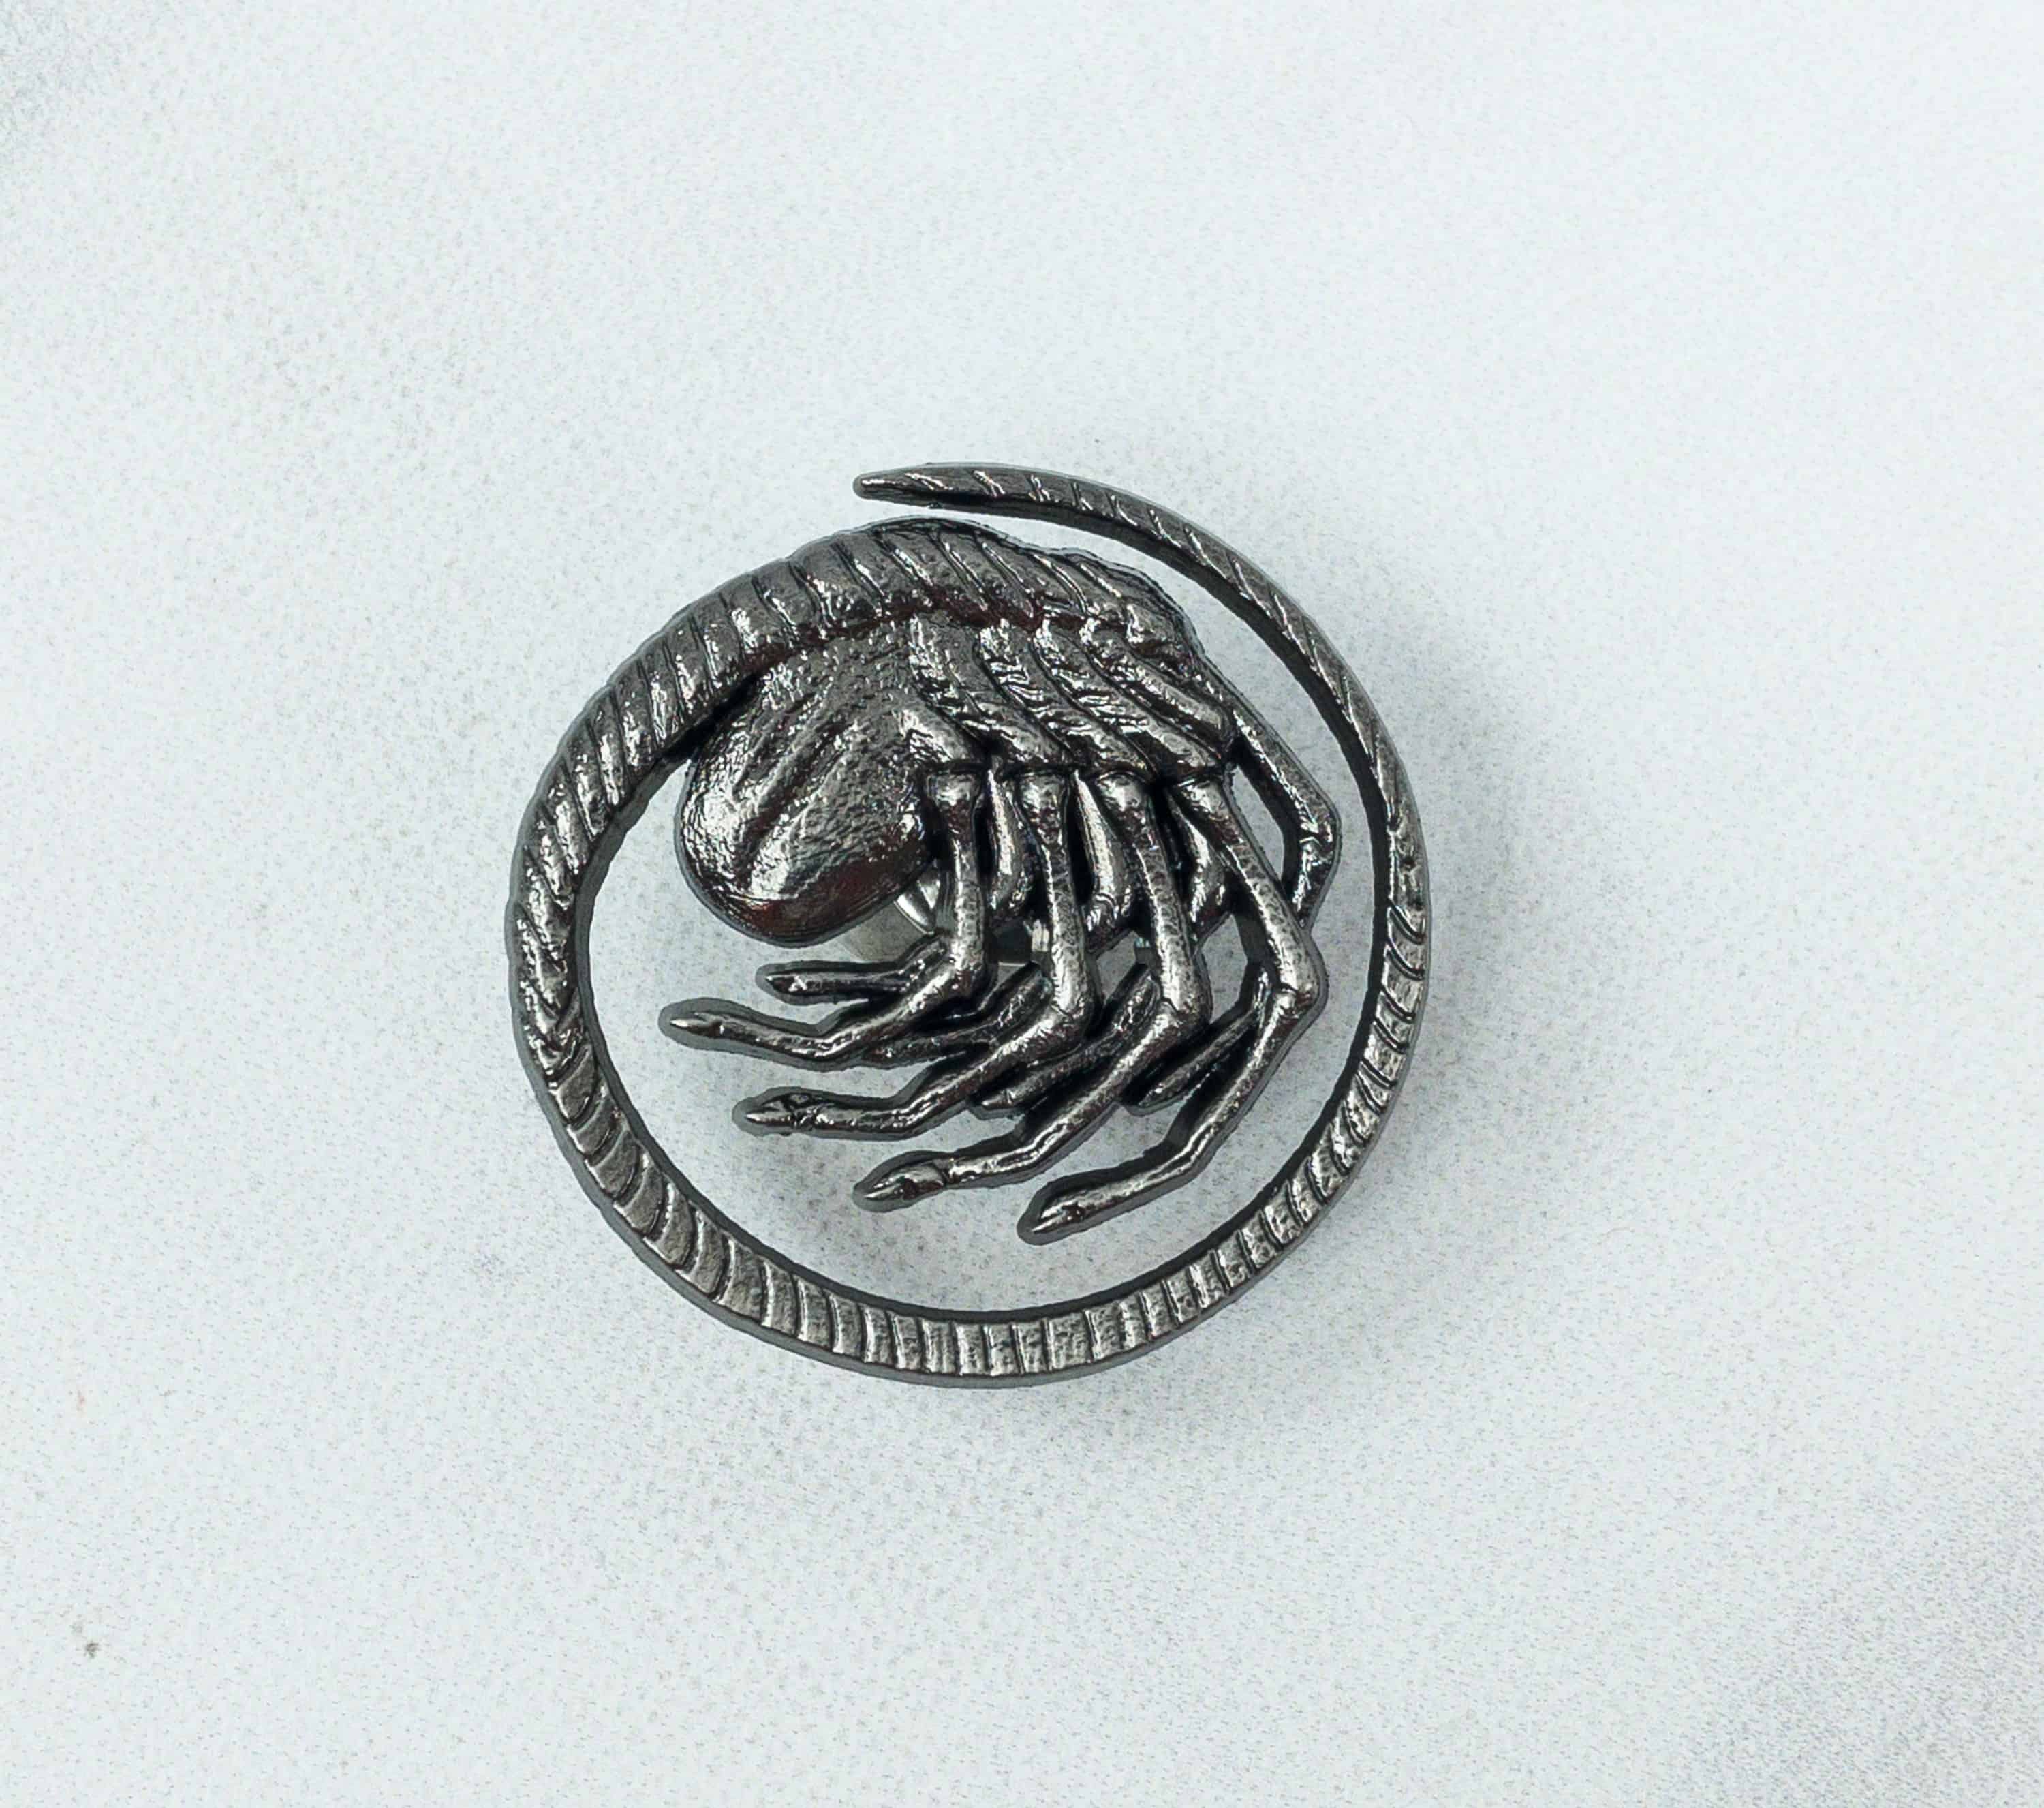 Alien Facehugger 1.25" Metal Cloisonne Pin Loot Crate Exclusive BRAND NEW 